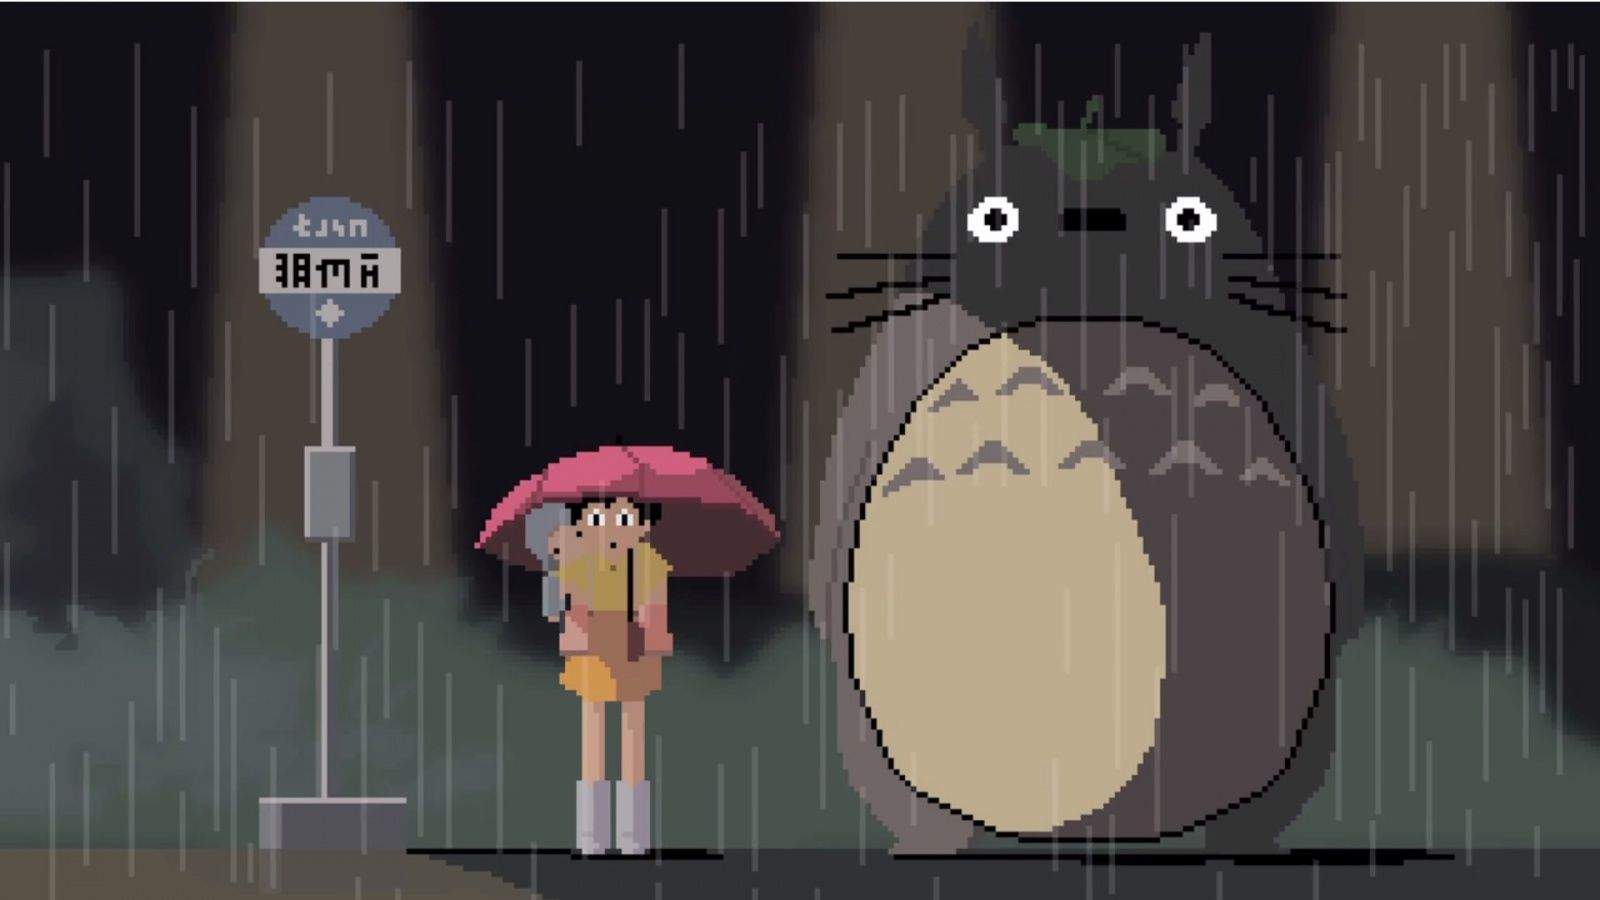 It's rainy out there for neighbors. Screengrab: Pablo Fernandez Eyre